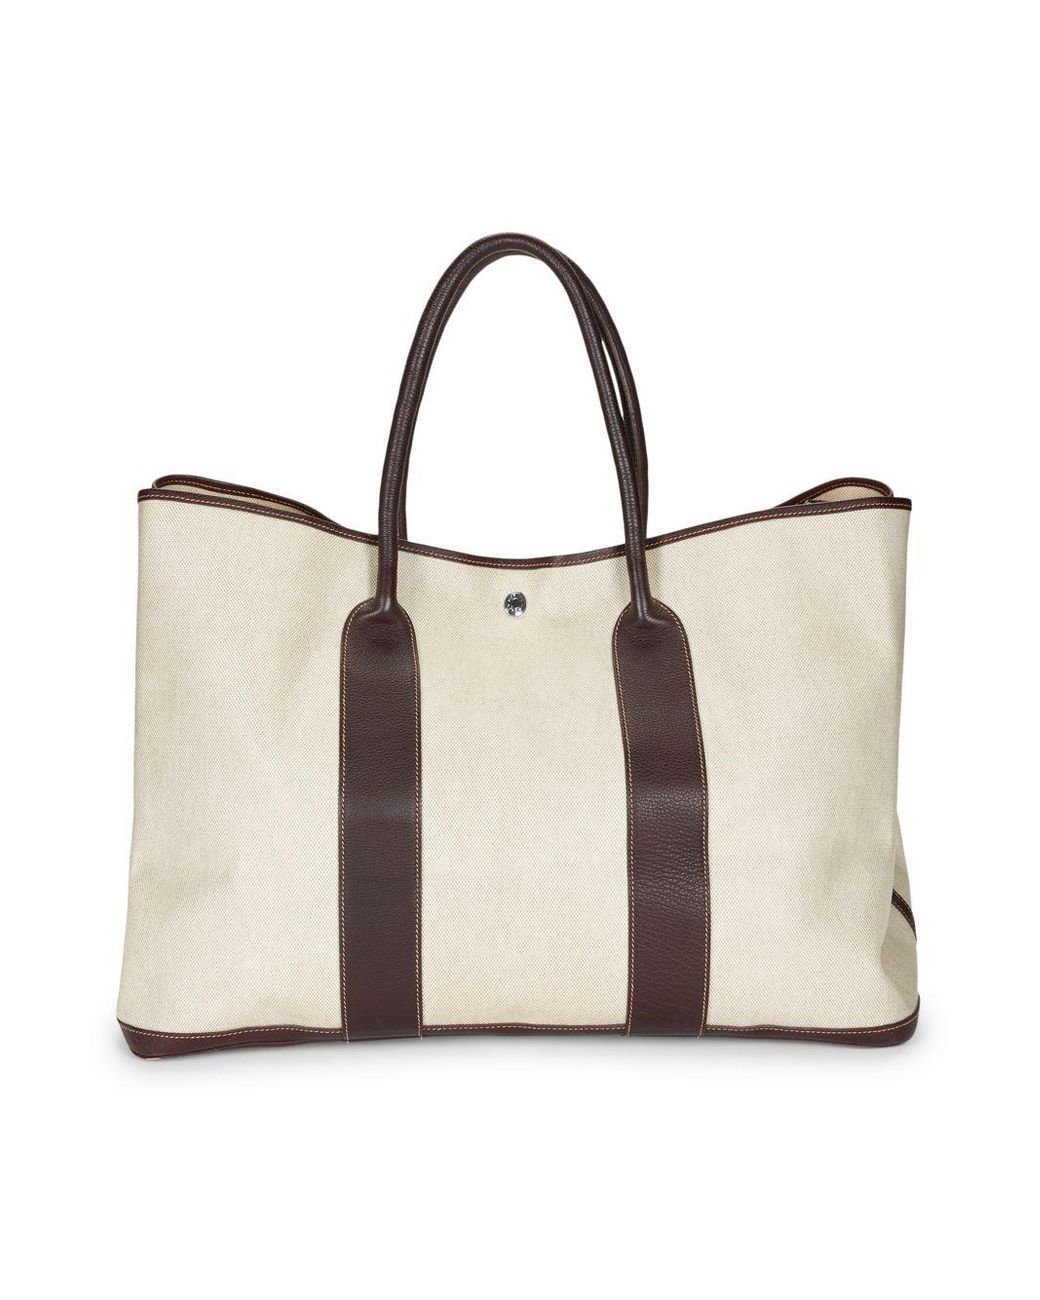 Hermès Vintage Garden Party Leather-trim Canvas Tote in Natural | Lyst